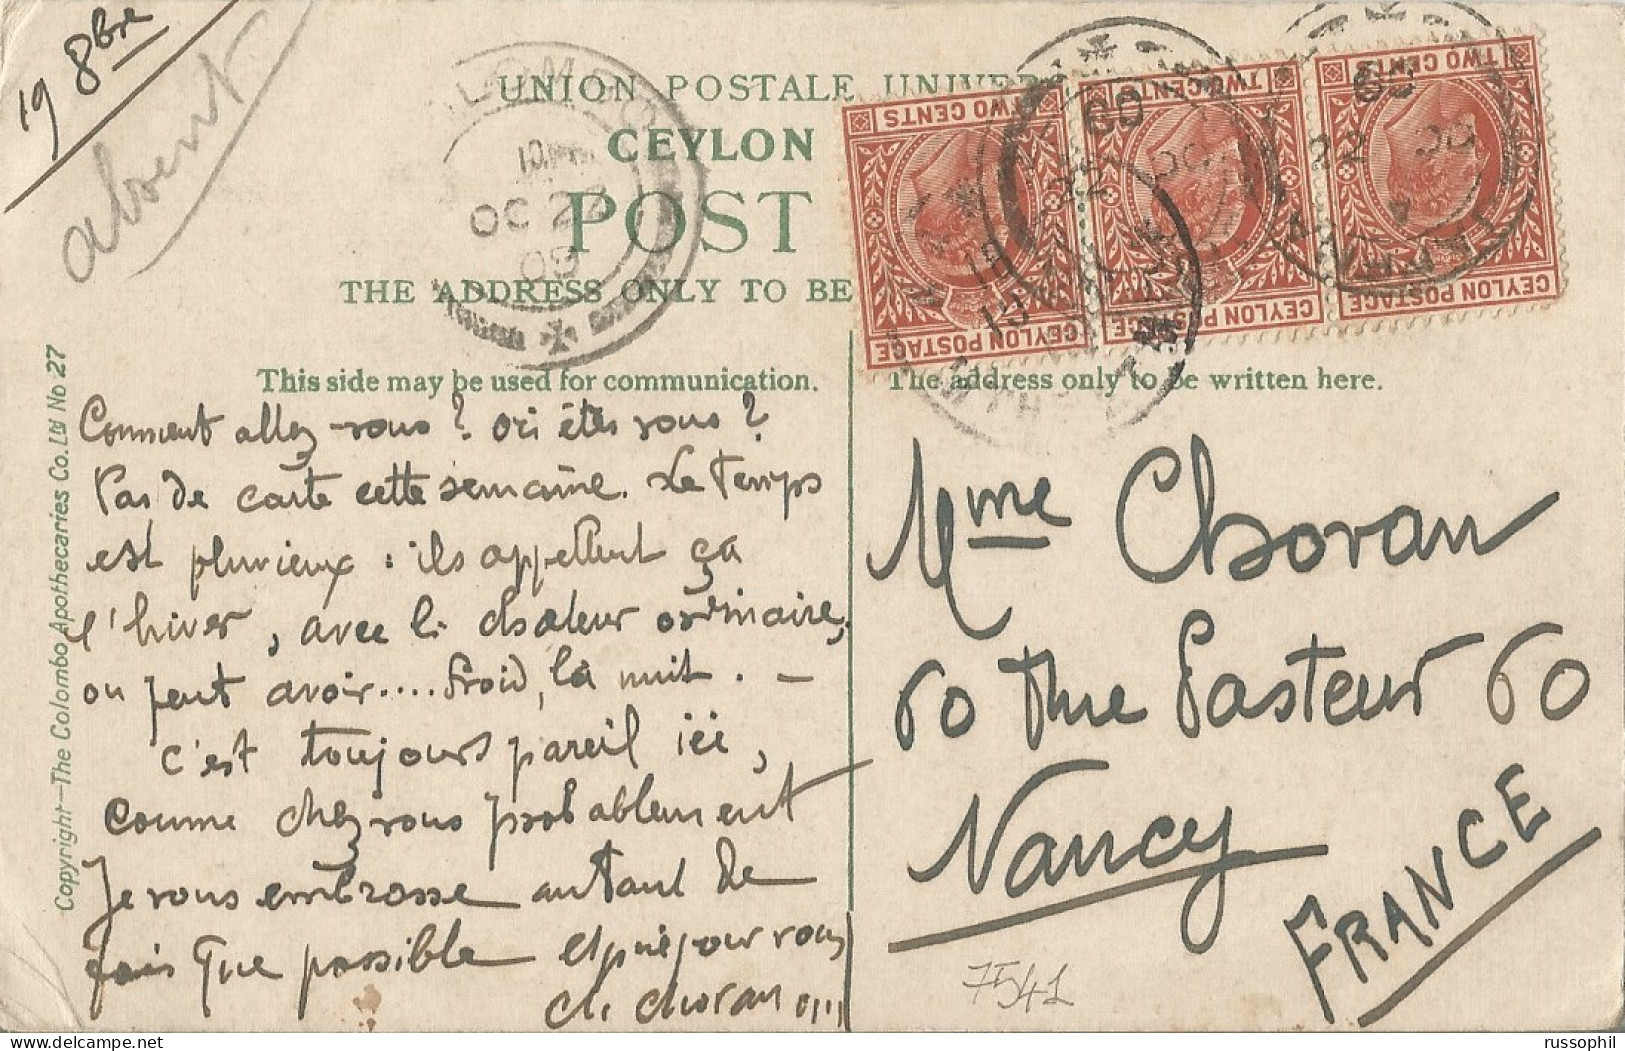 CEYLON – CURIOSITY / REVERSED DAY AND MONTH IN DATE BLOCK OF JAFFNA DEPARTURE CDS CANCELLING FRANKED PC - 1922 - Ceylon (...-1947)